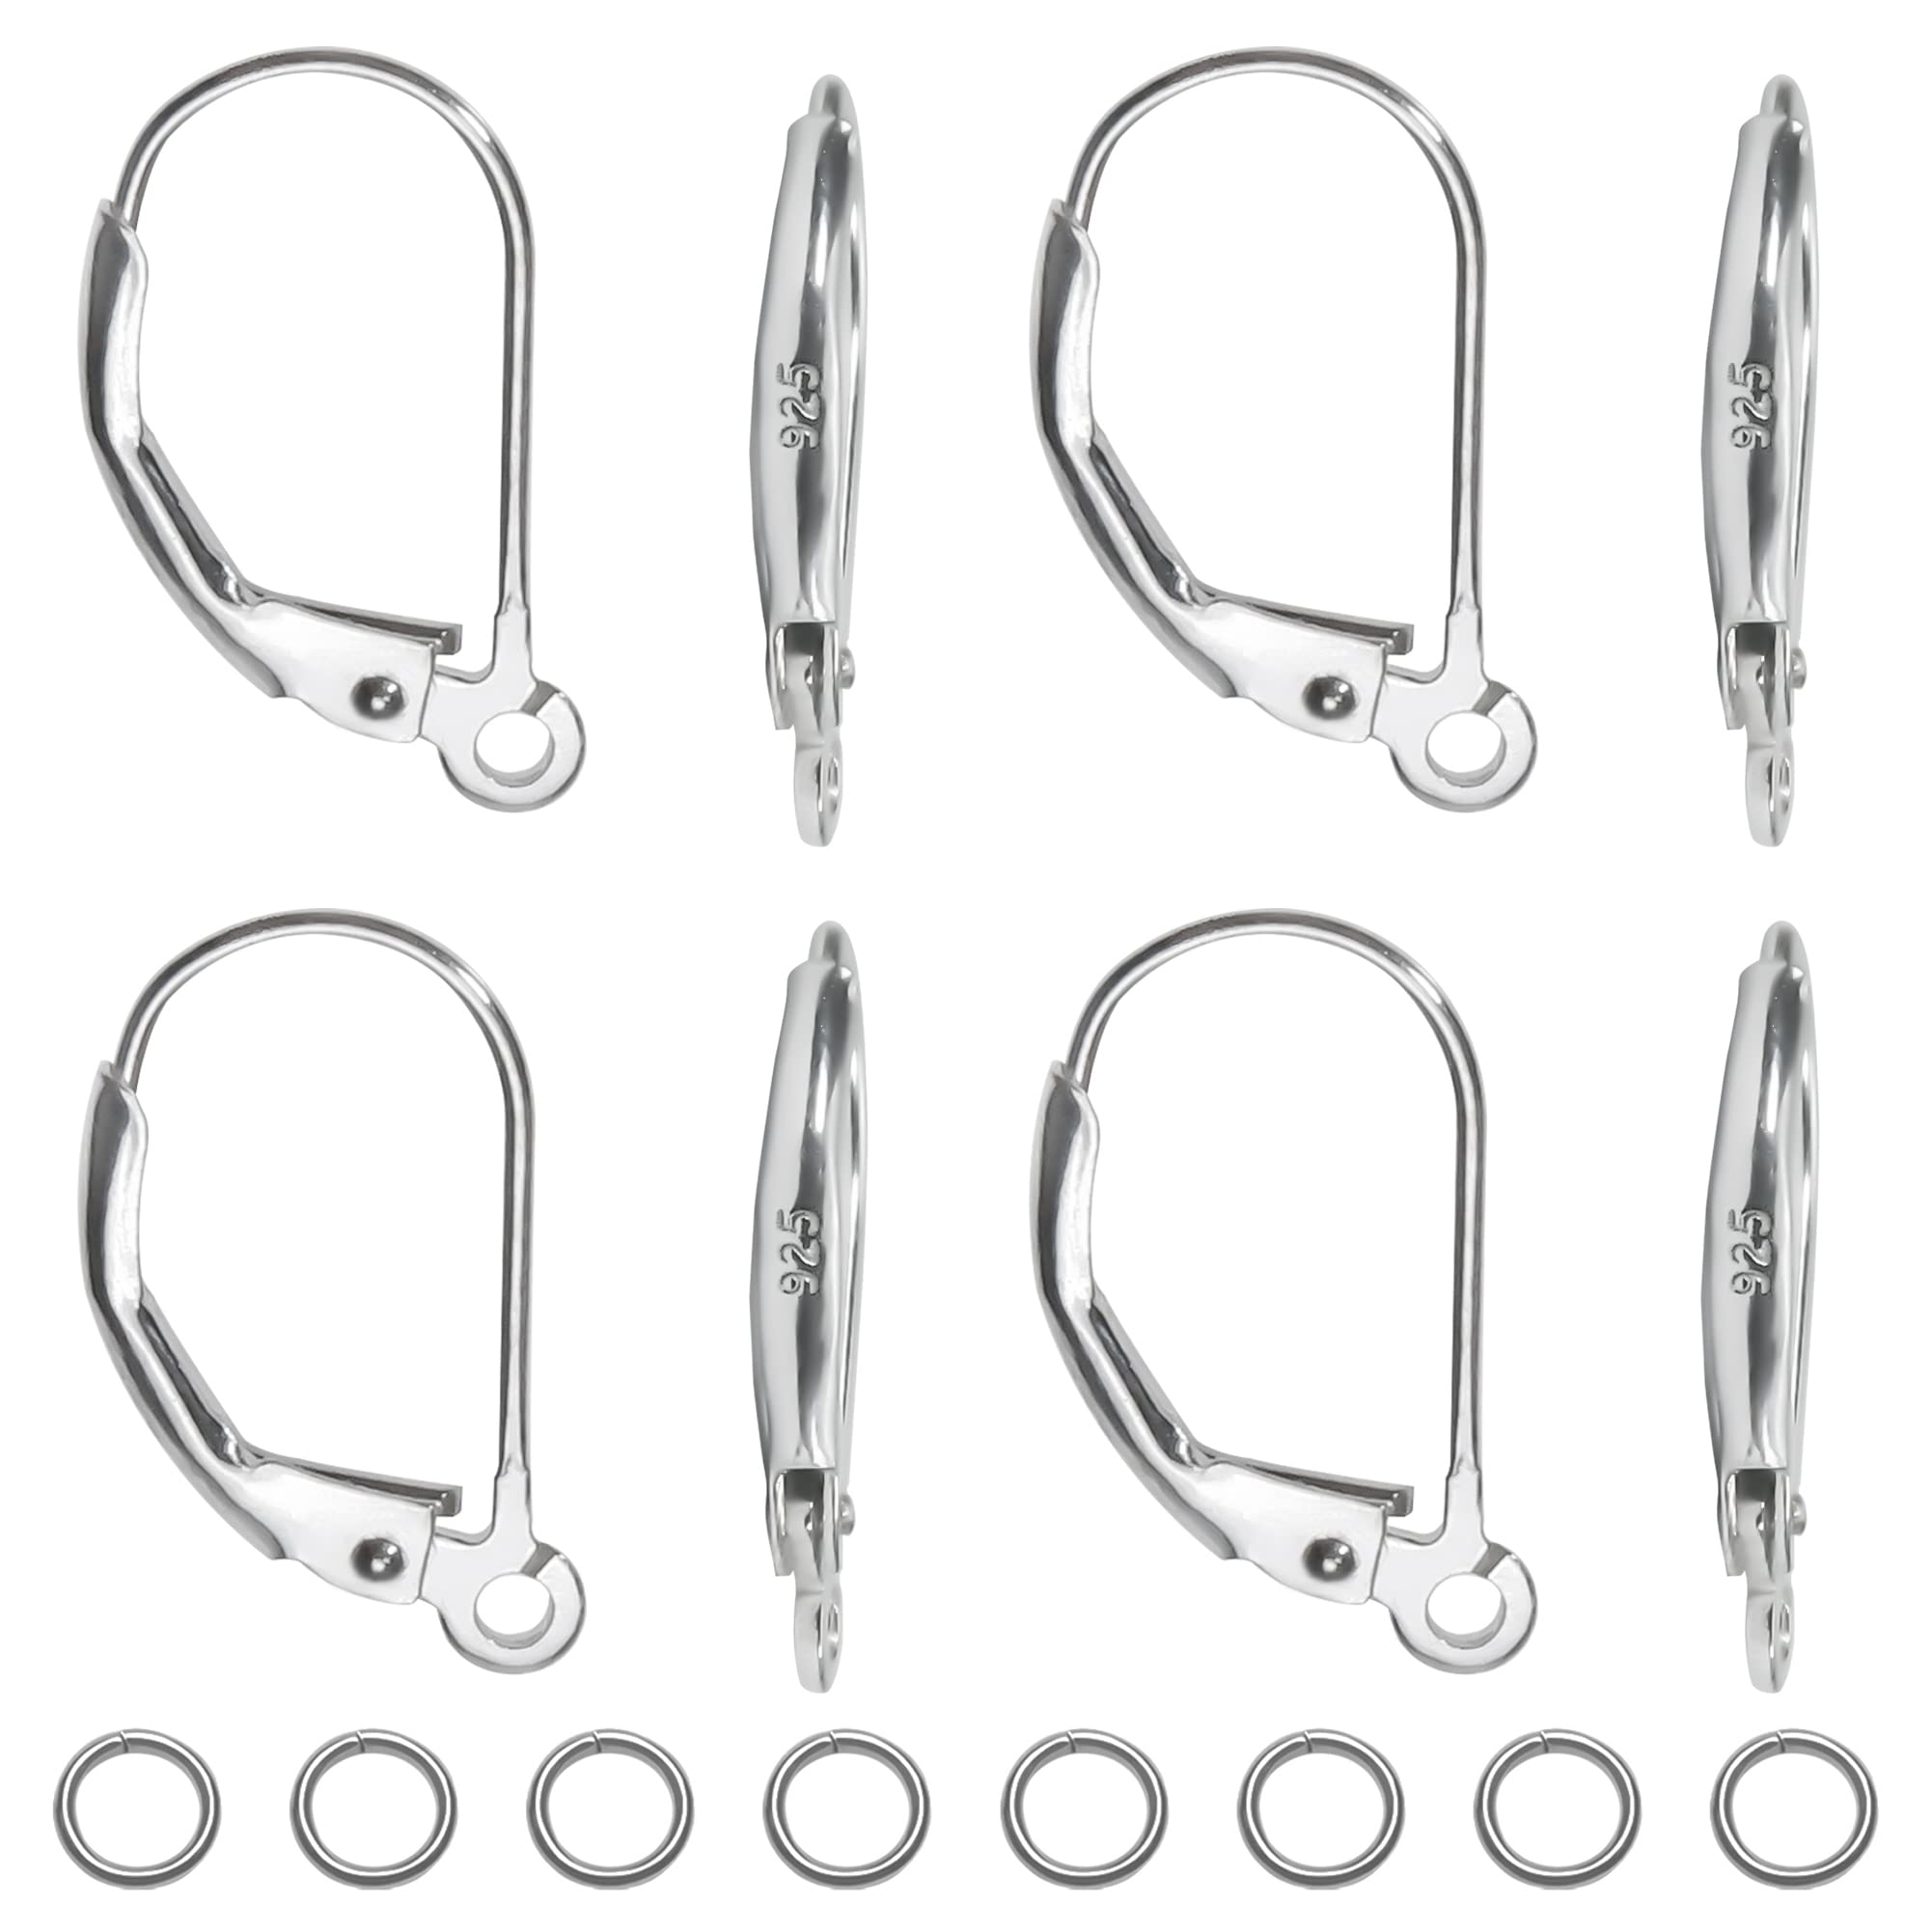 TOAOB 8pcs 925 Sterling Silver Leverback French Earring Hooks